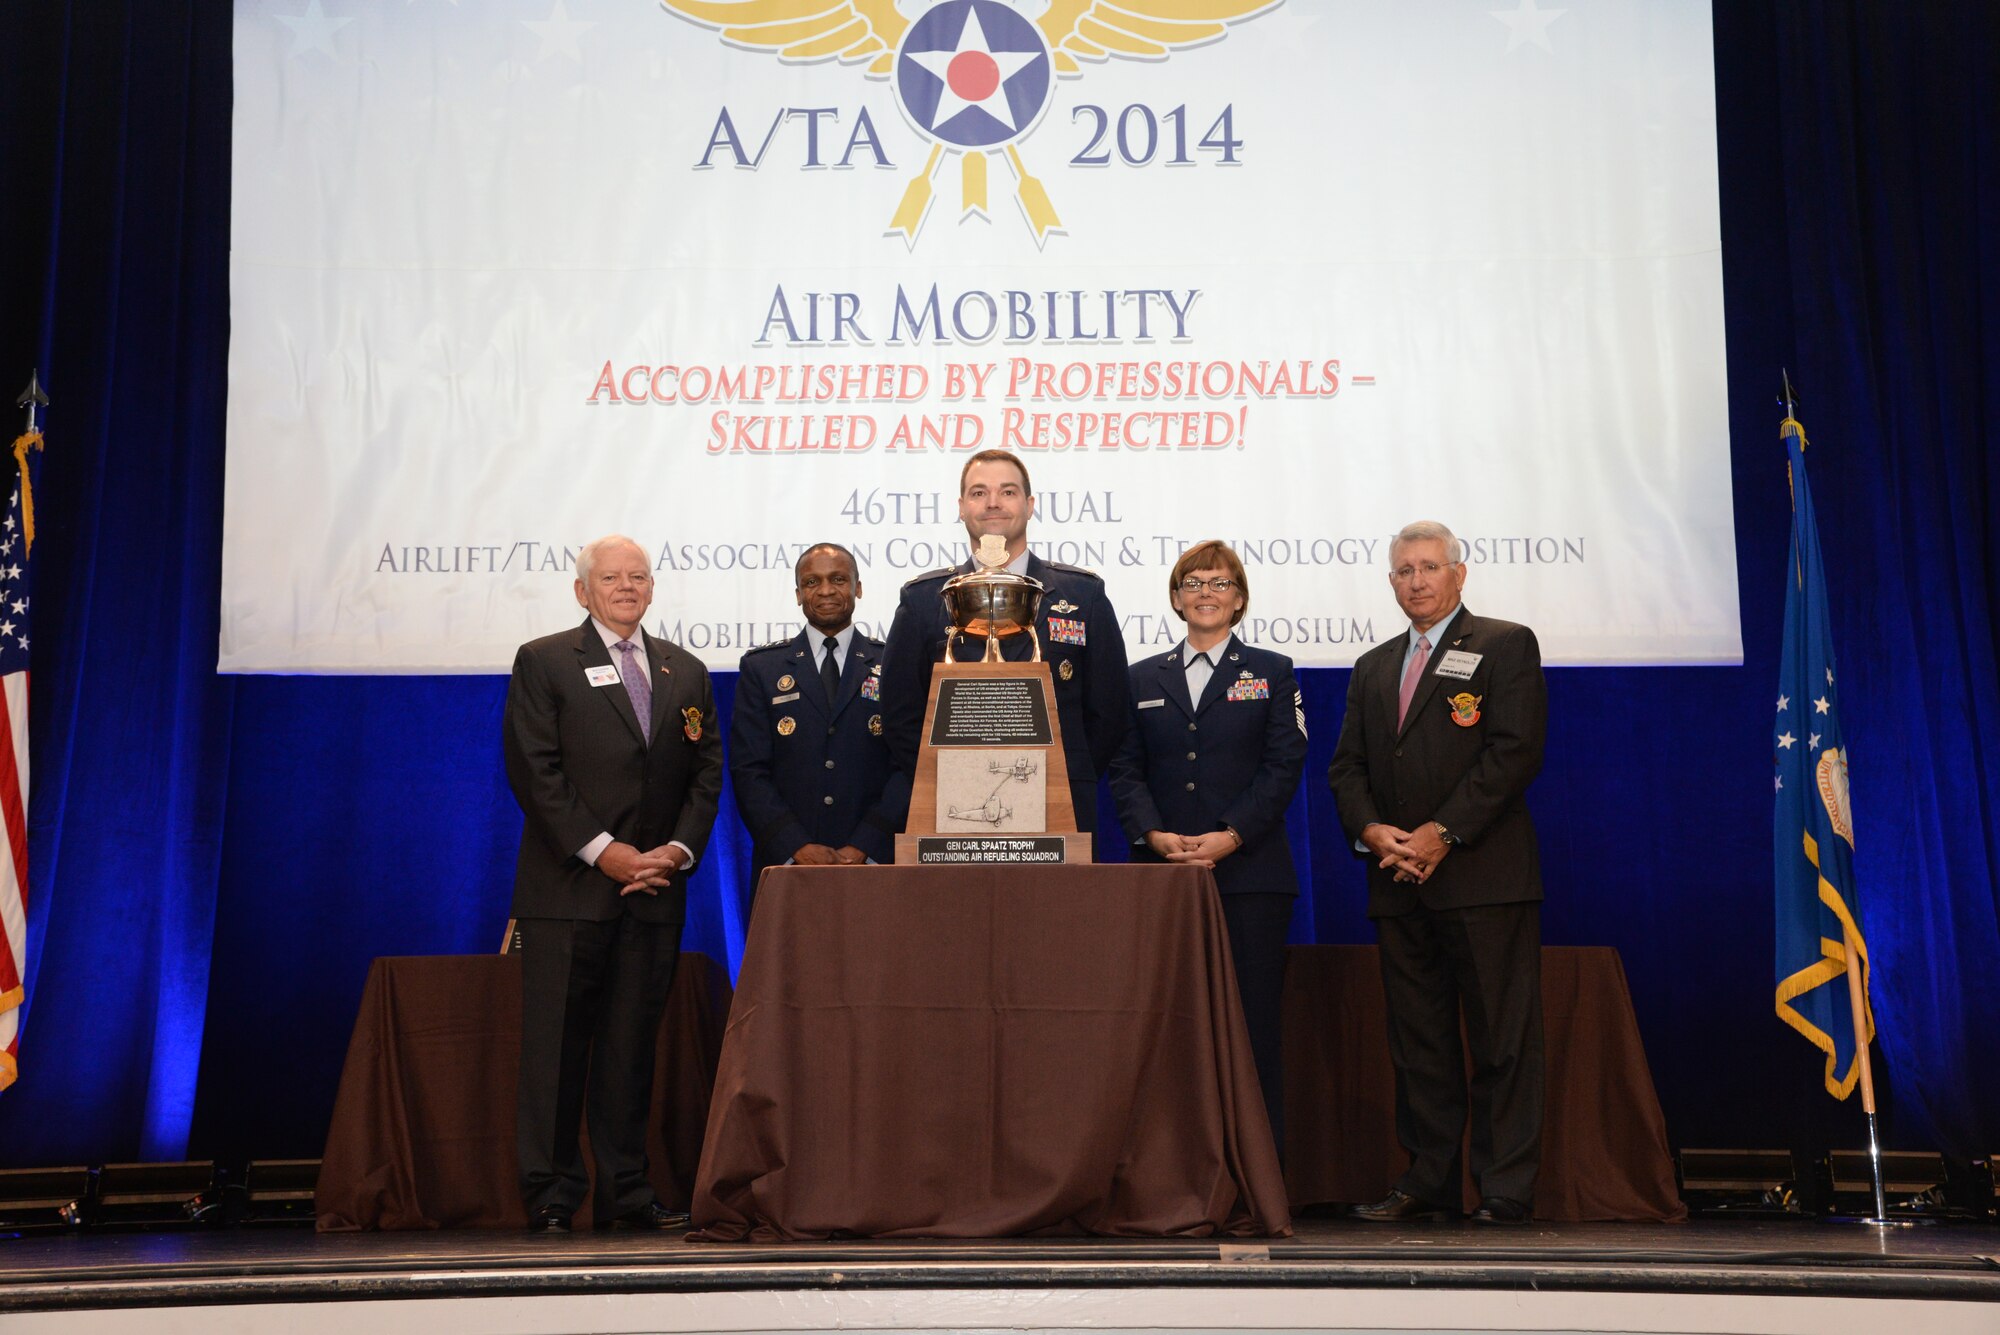 U.S. Air Force Lt. Col. Michael Parks, center, 351st Air Refueling Squadron commander, receives the 2013 Gen. Carl A. Spaatz Trophy on behalf of the 351st ARS Oct. 30, 2014, during the 46th Annual Airlift/Tanker Association Convention and Symposium. The 351st ARS was the first overseas unit to win the trophy which is awarded to the most outstanding air refueling squadron in Air Mobility Command. (Courtesy Photo)